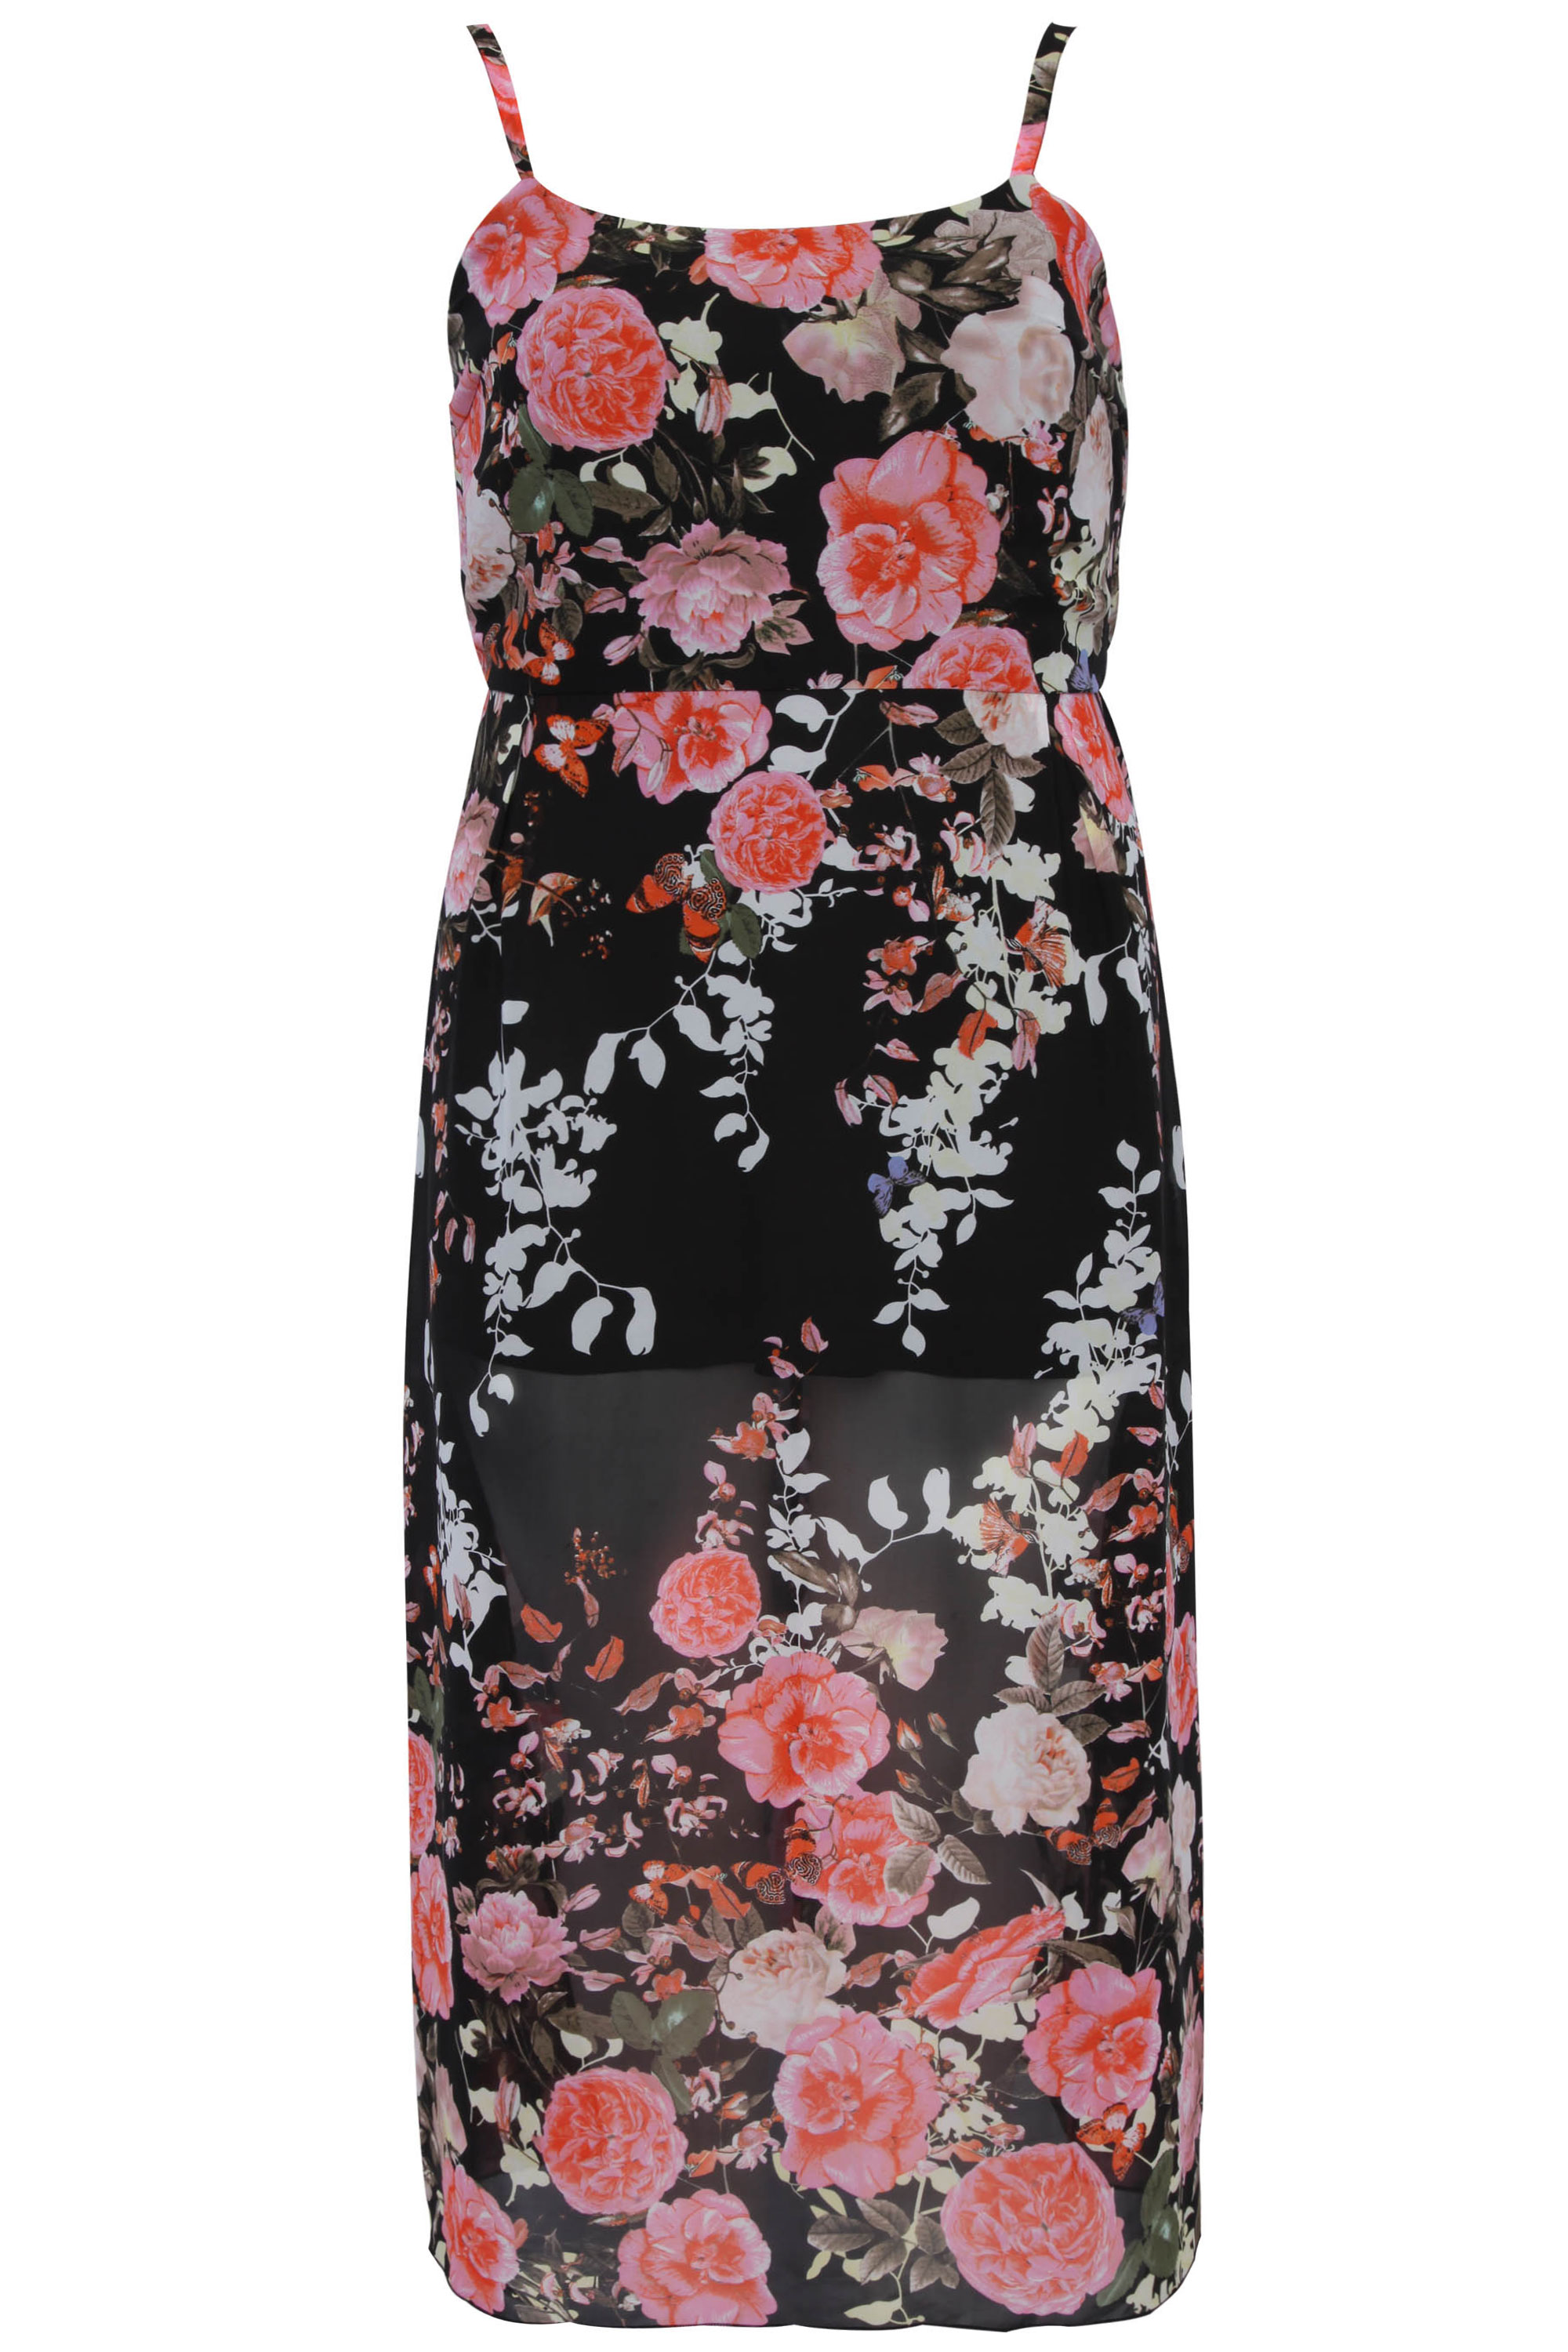 Black And Pink Floral Rose Print Maxi Dress With Chiffon Panels plus ...